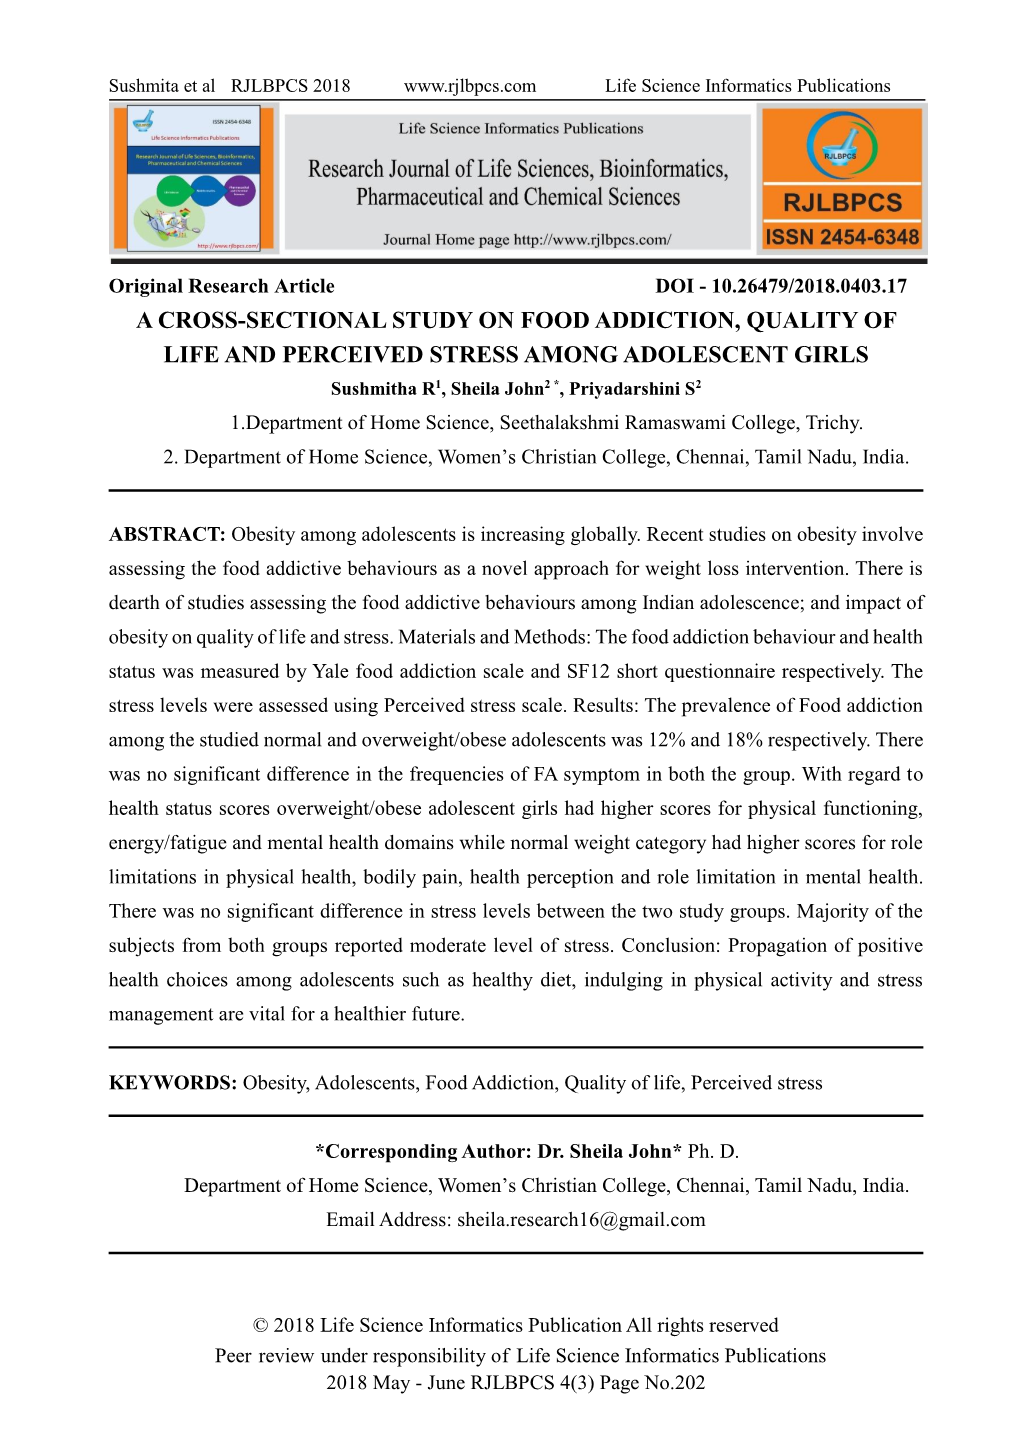 A Cross-Sectional Study on Food Addiction, Quality of Life And